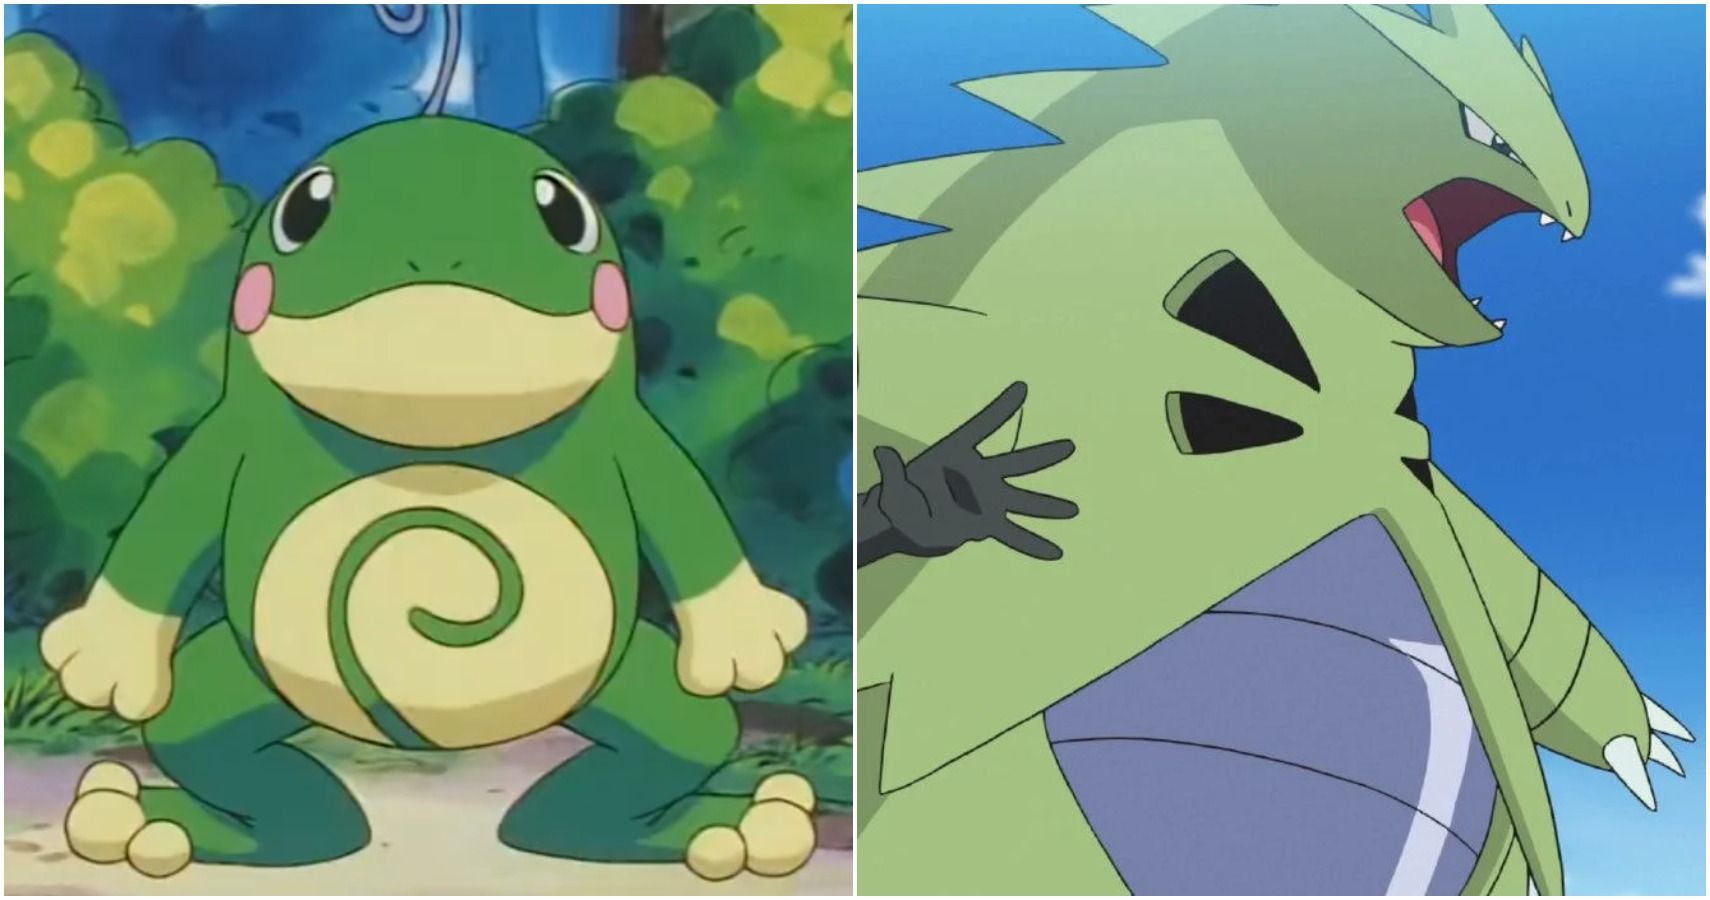 politoed and tyranitar feature